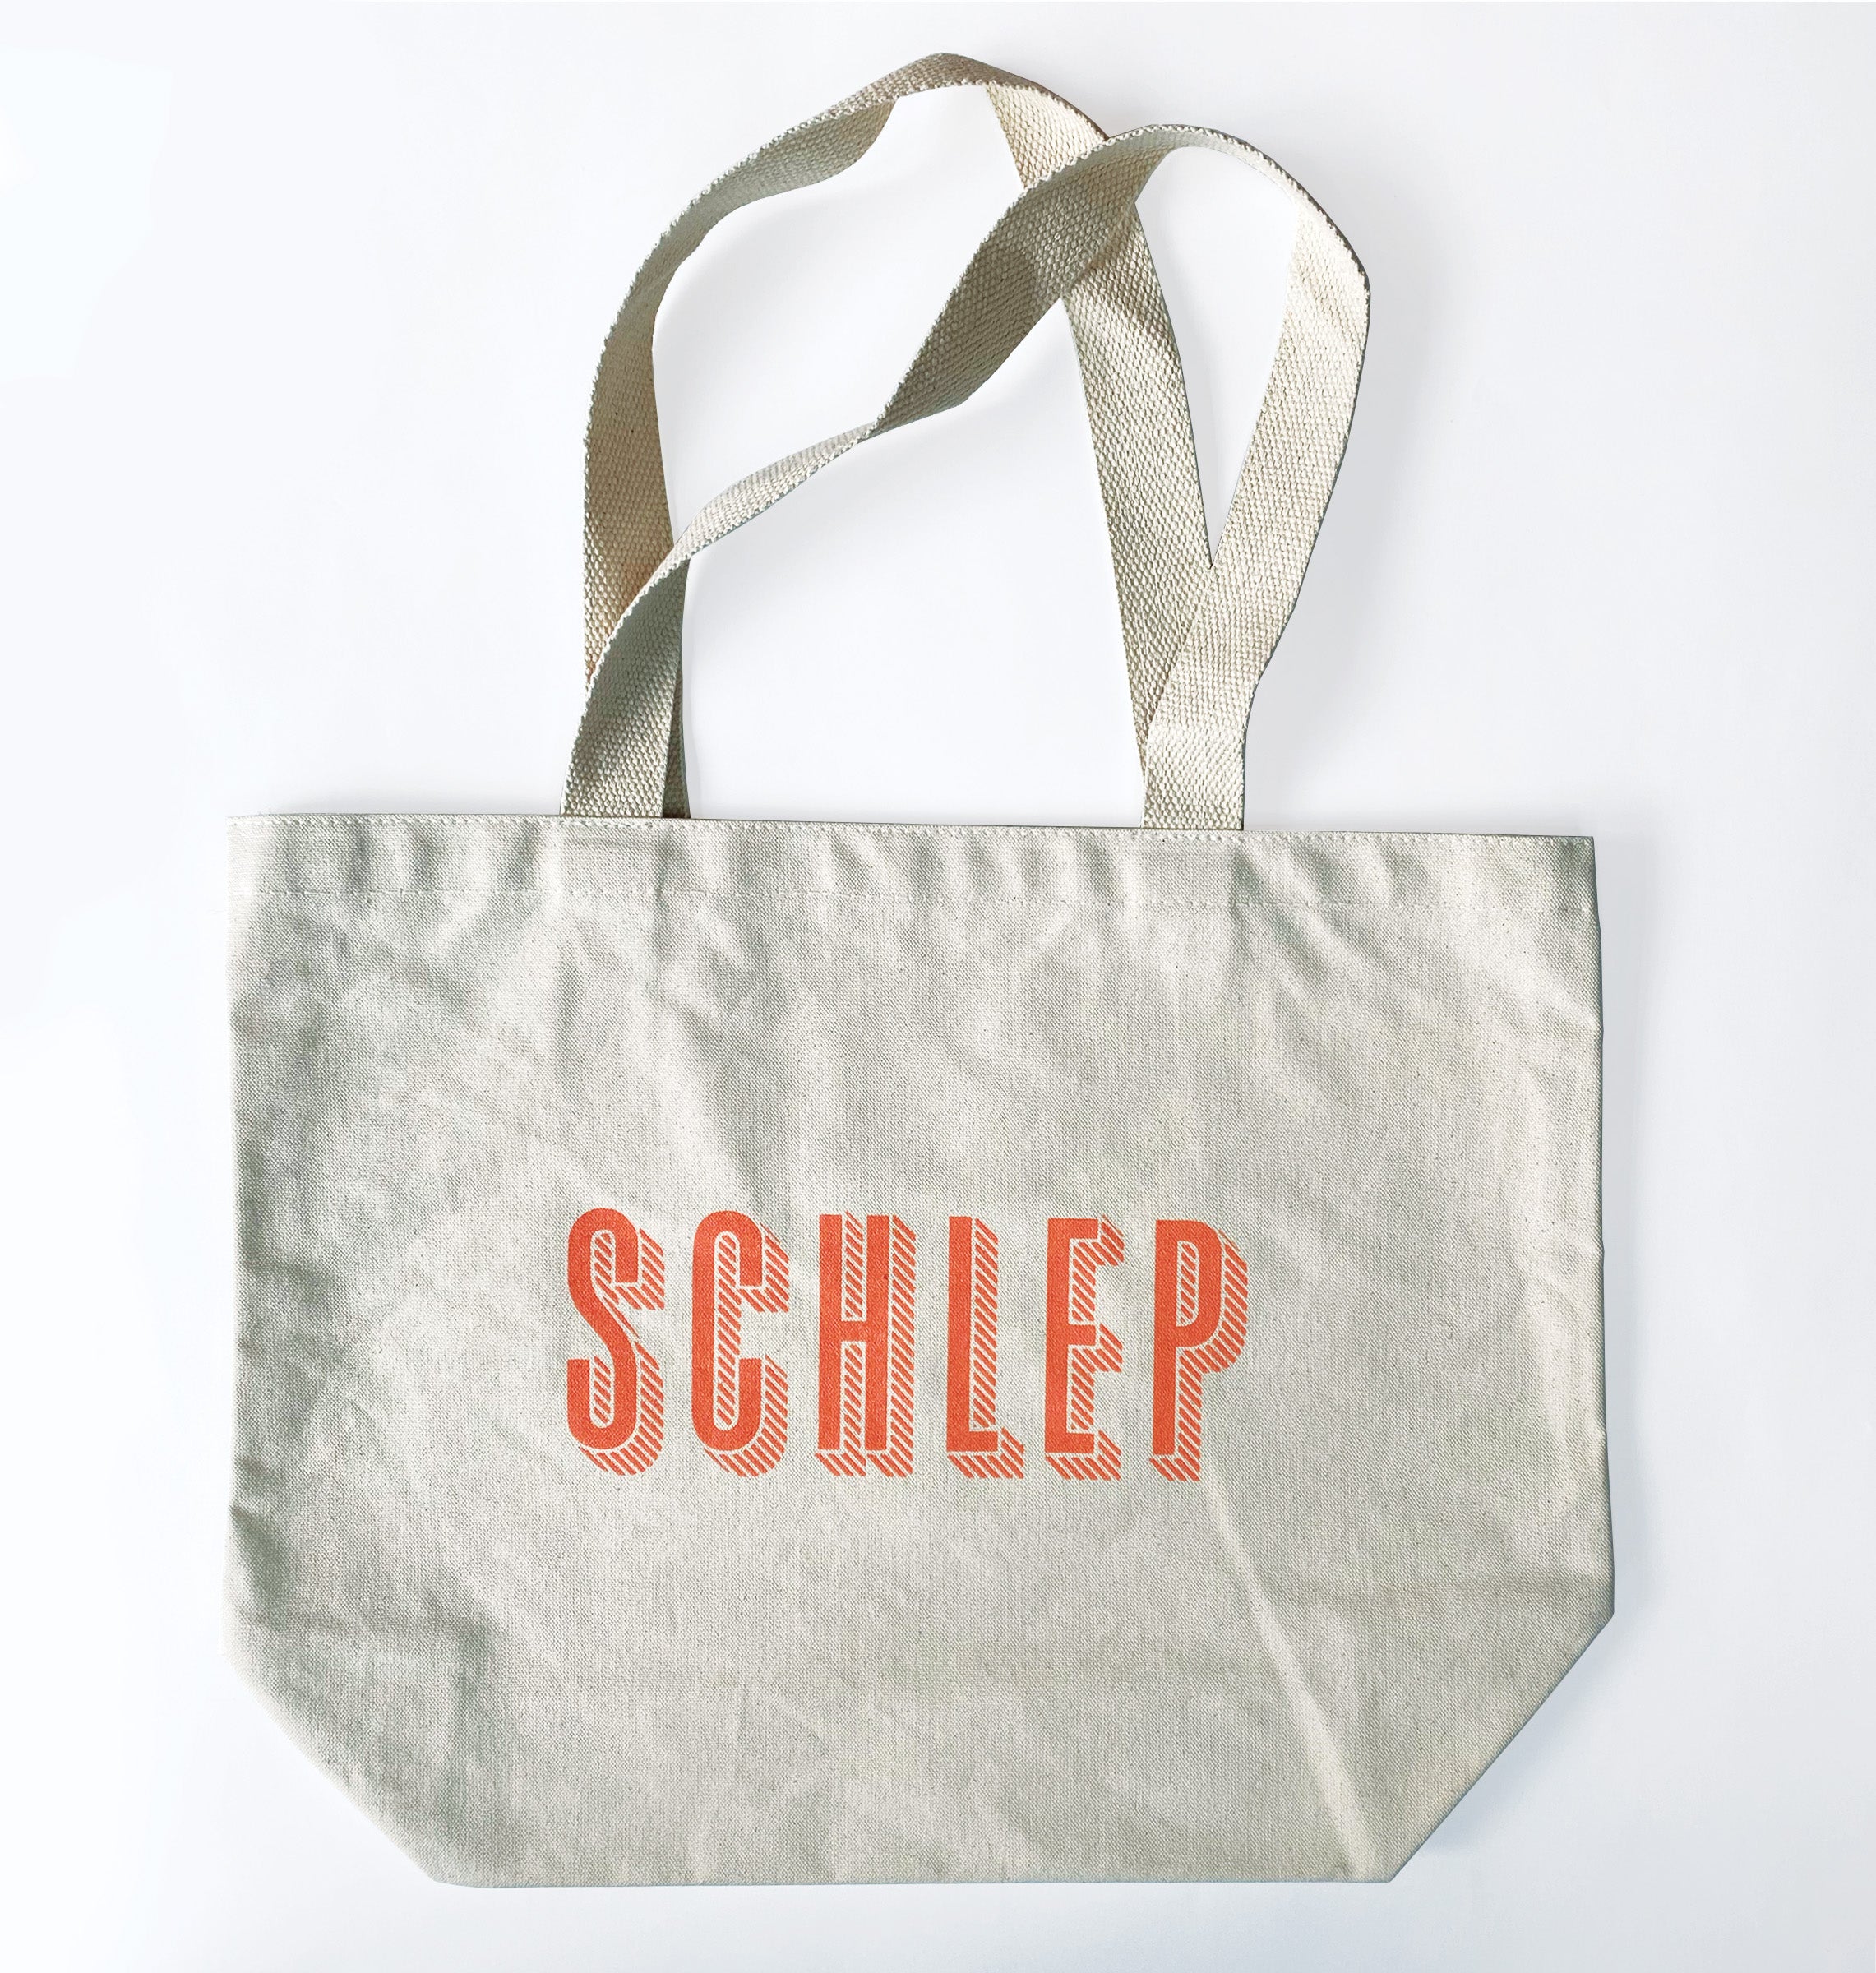 Schlep Tote Bag